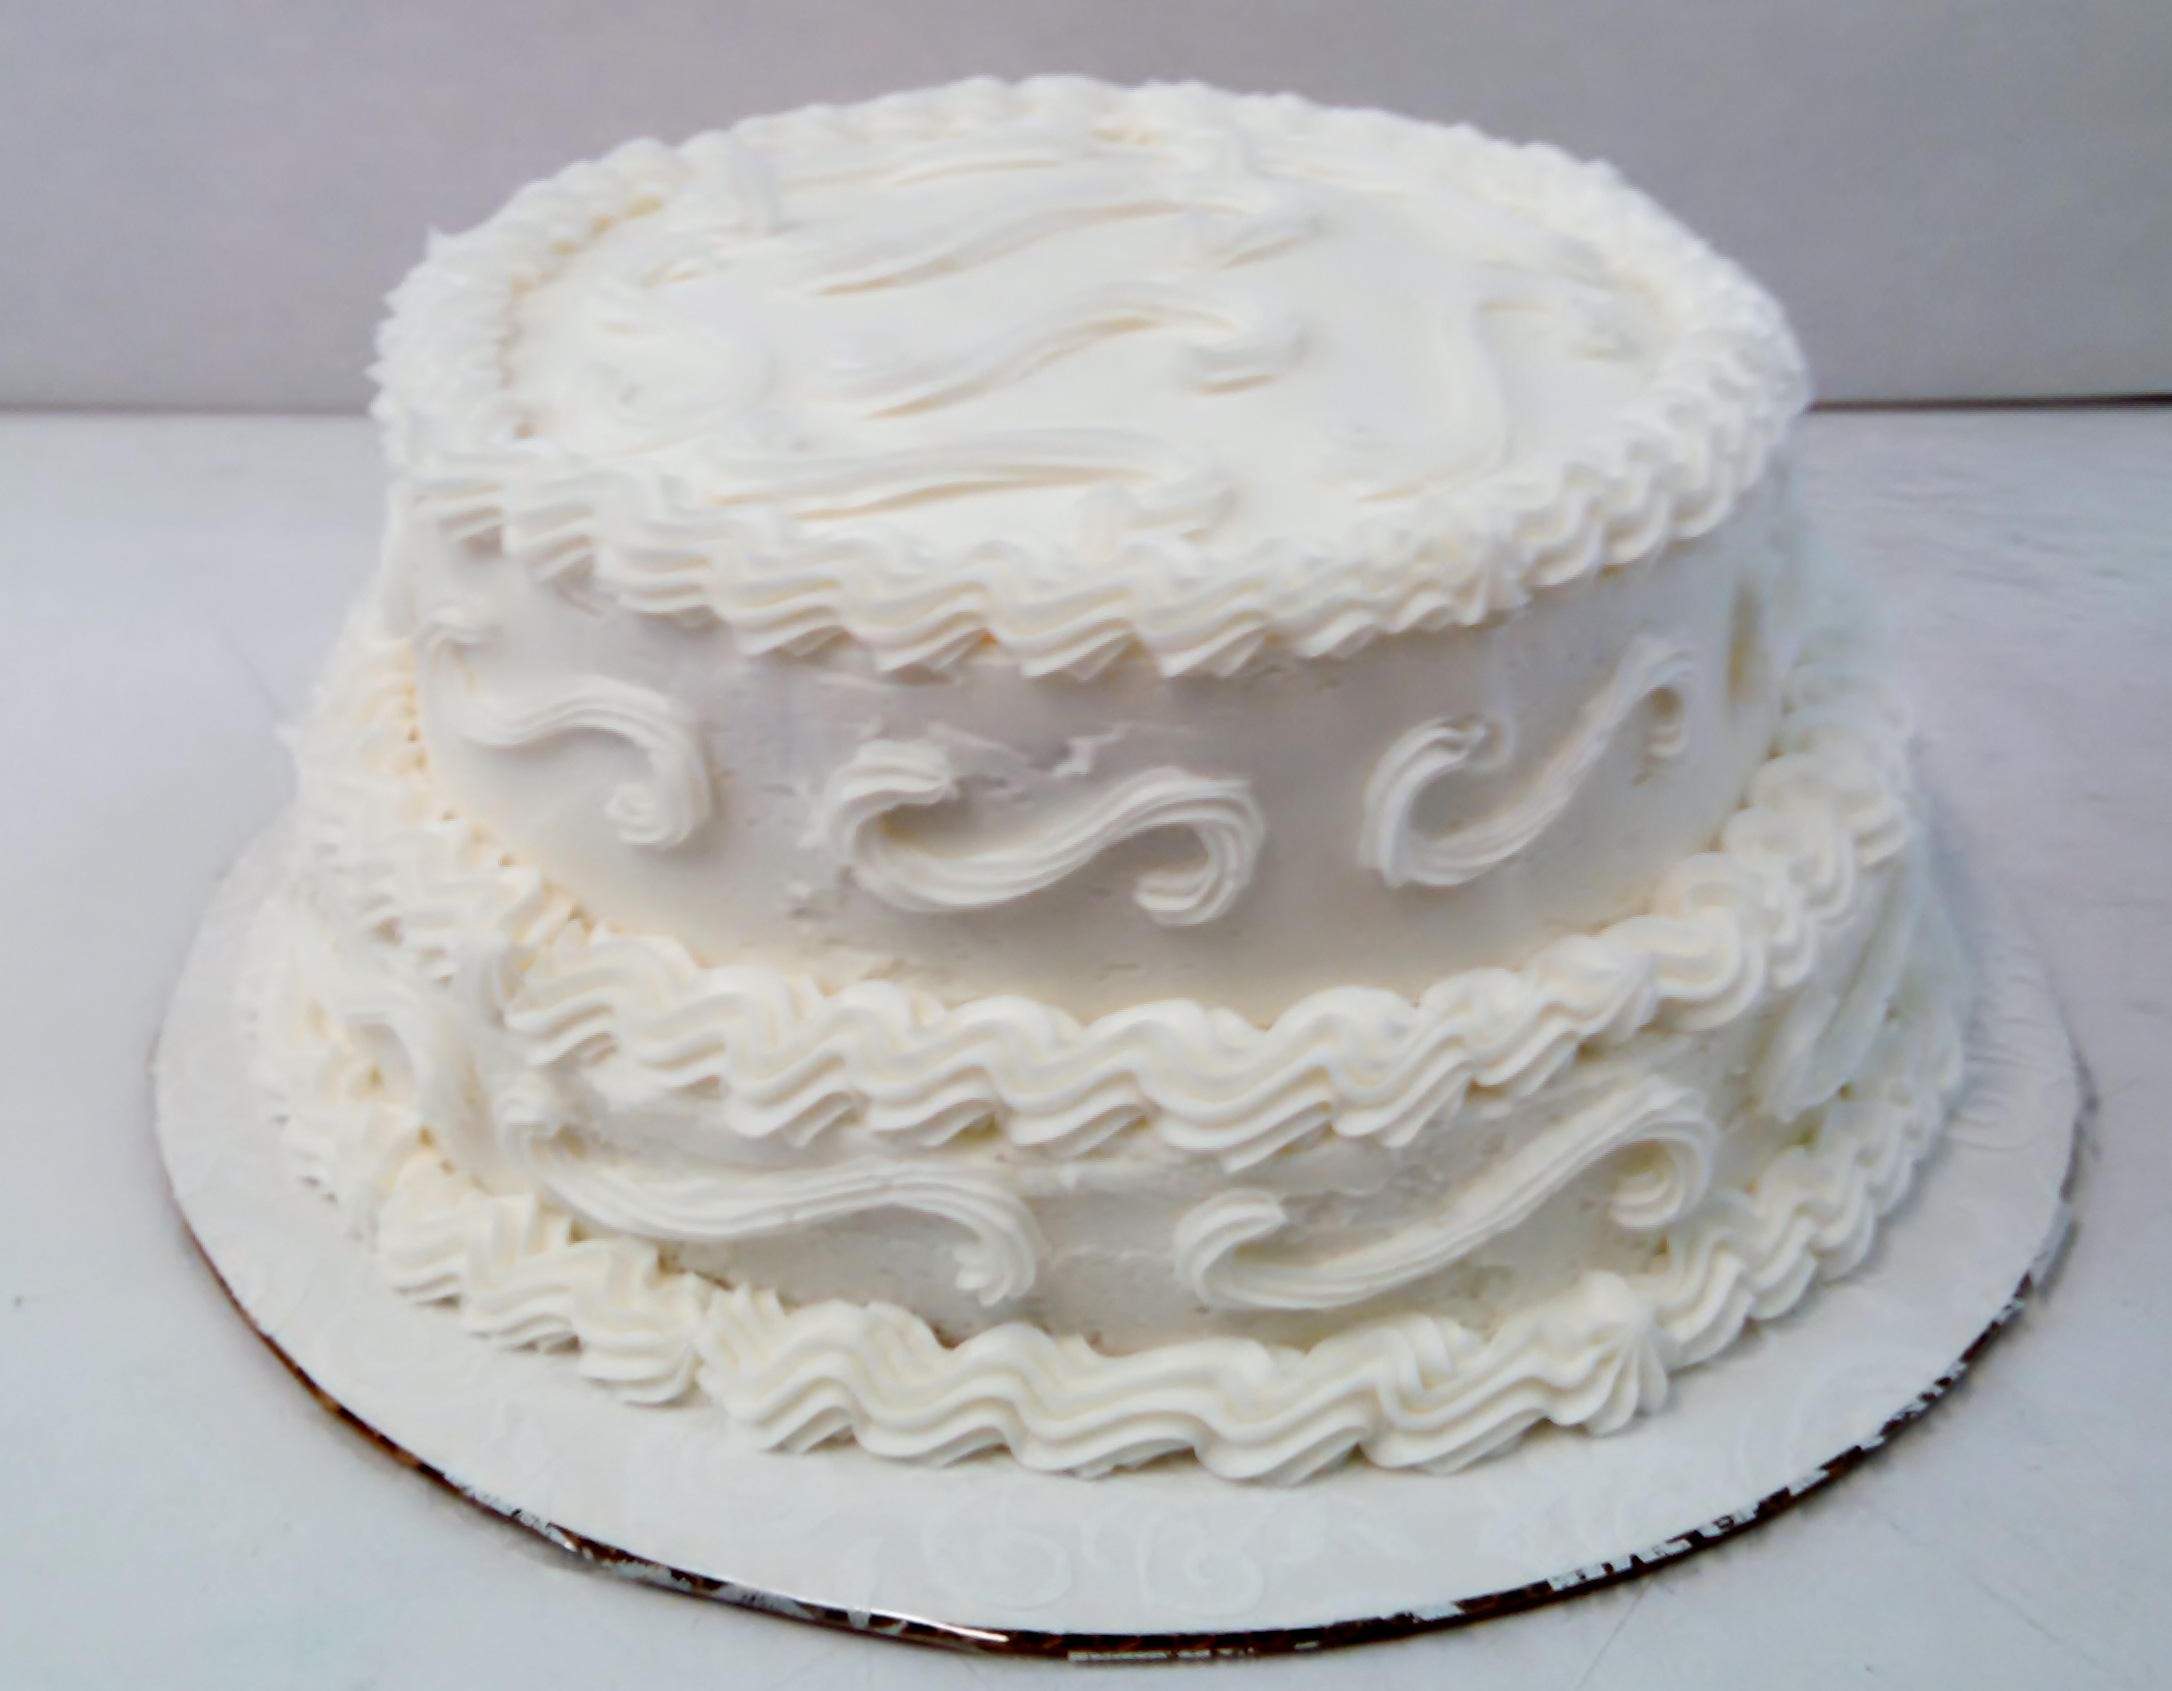 Two Tier Cake